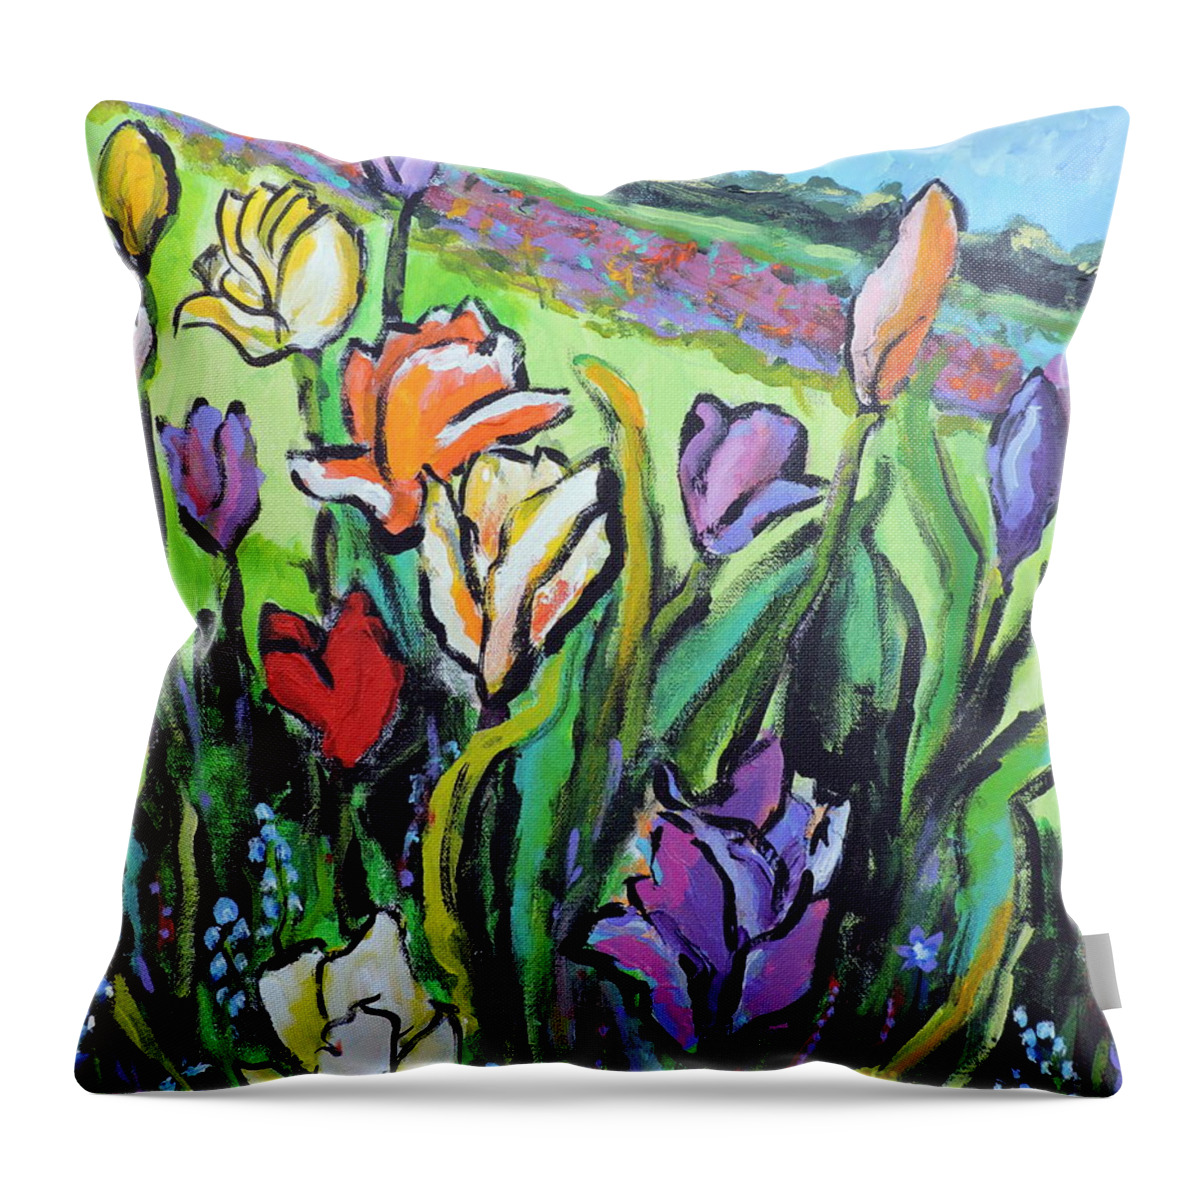 Floral Throw Pillow featuring the painting Tulips by Jodie Marie Anne Richardson Traugott     aka jm-ART